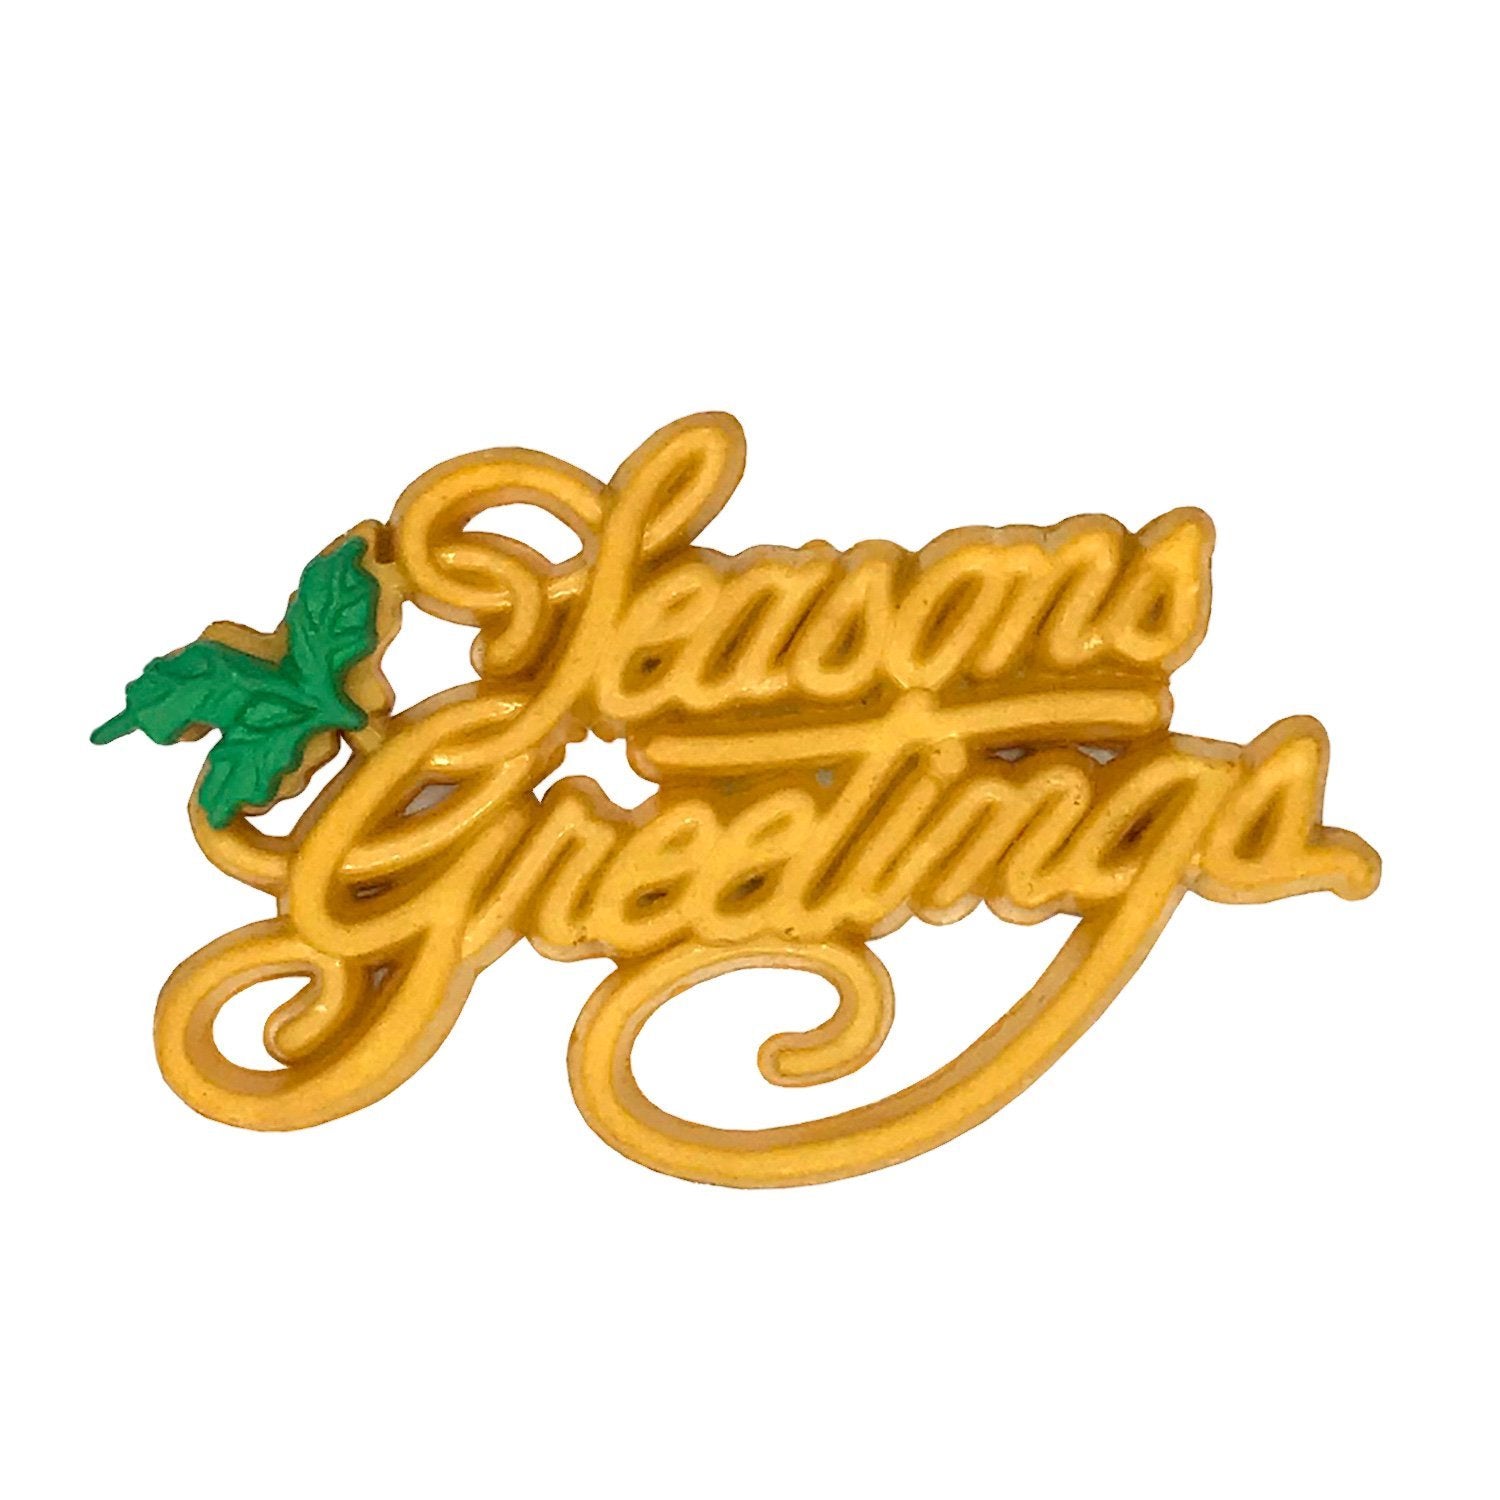 Seasons Greetings - SB179 - Buttons Galore and More